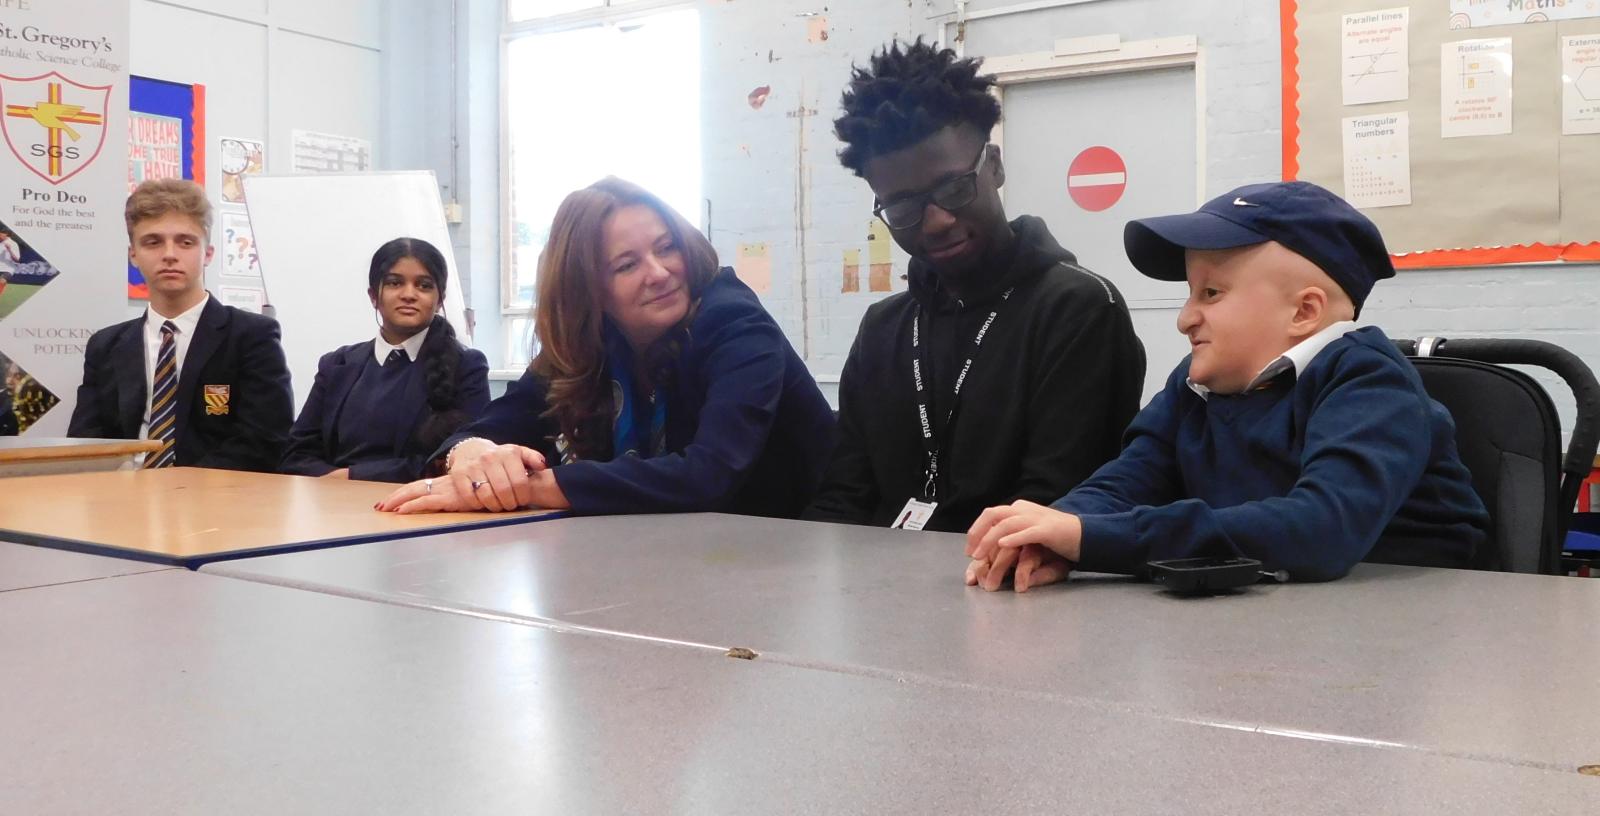 Secretary of State for Education visits St Gregory's Science College - Diocese of Westminster